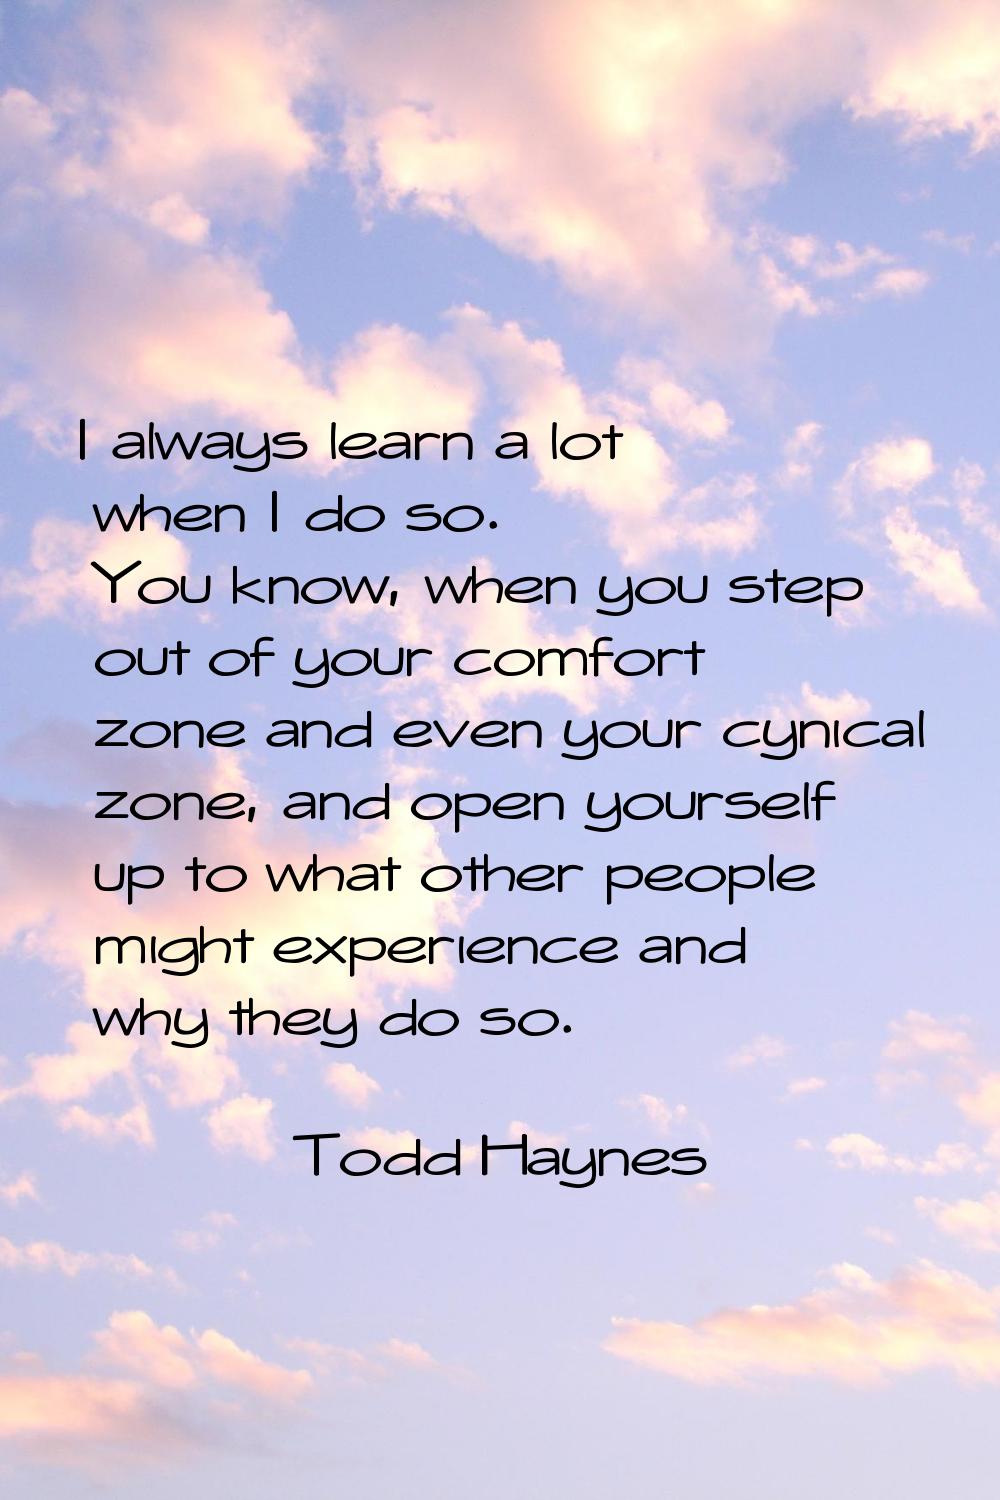 I always learn a lot when I do so. You know, when you step out of your comfort zone and even your c